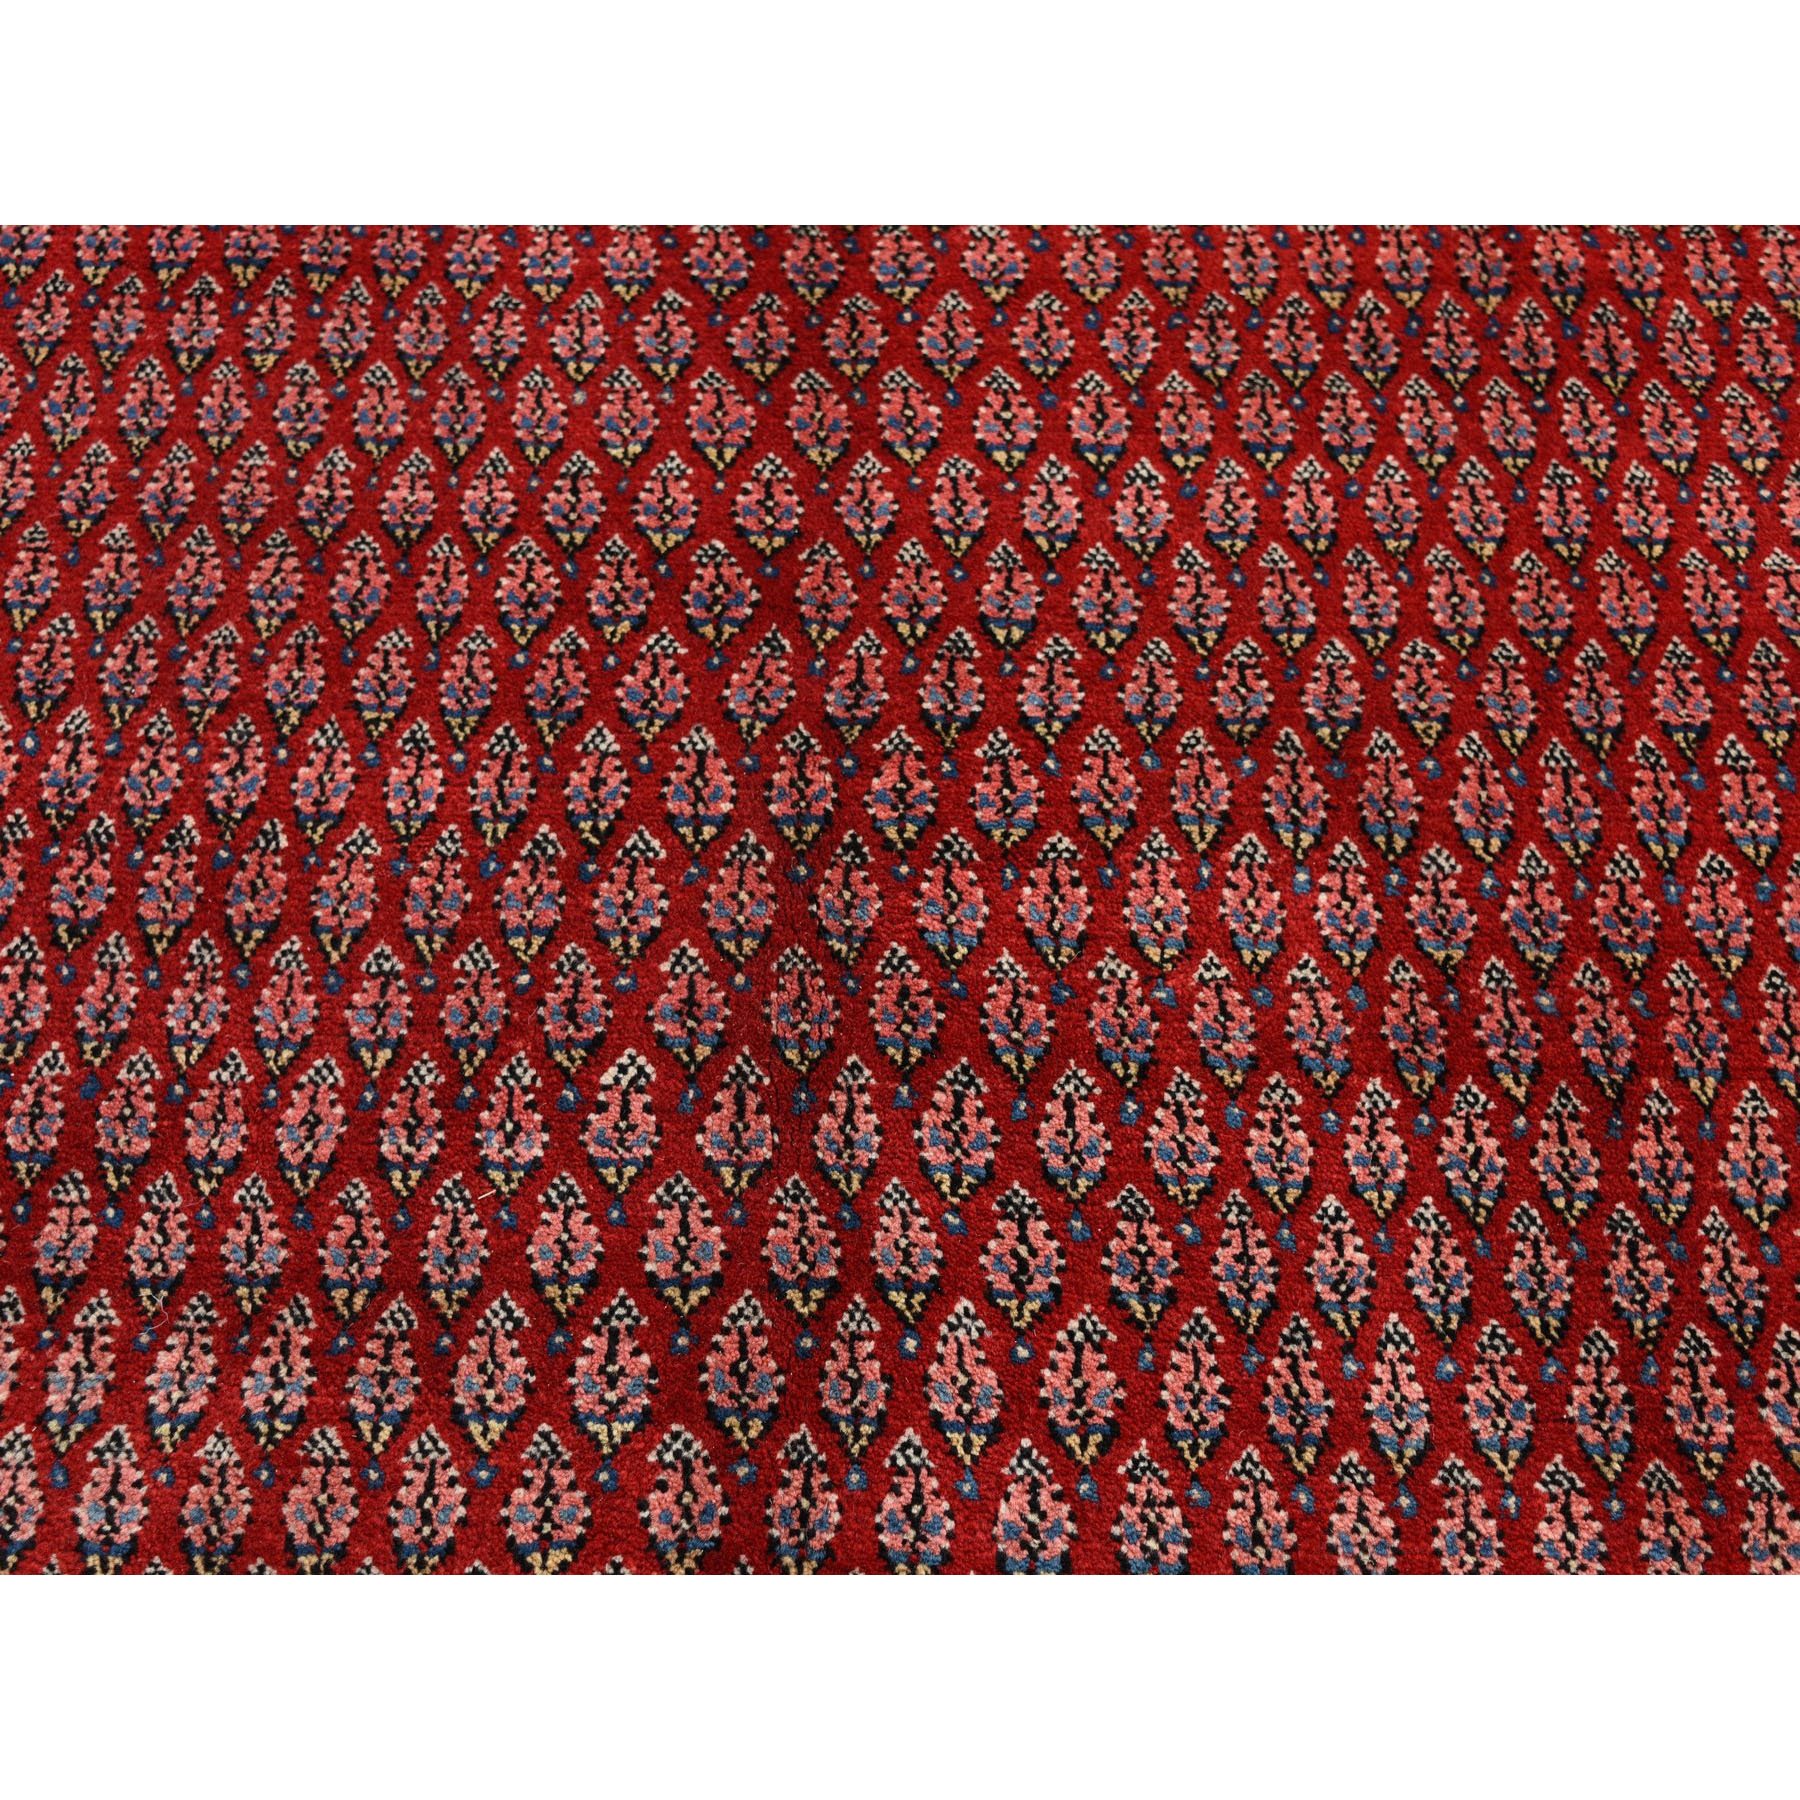 7-10 x11-2  Red New Persian Sarouk Mir With Repetitive Design Pure Wool Oriental Rug 